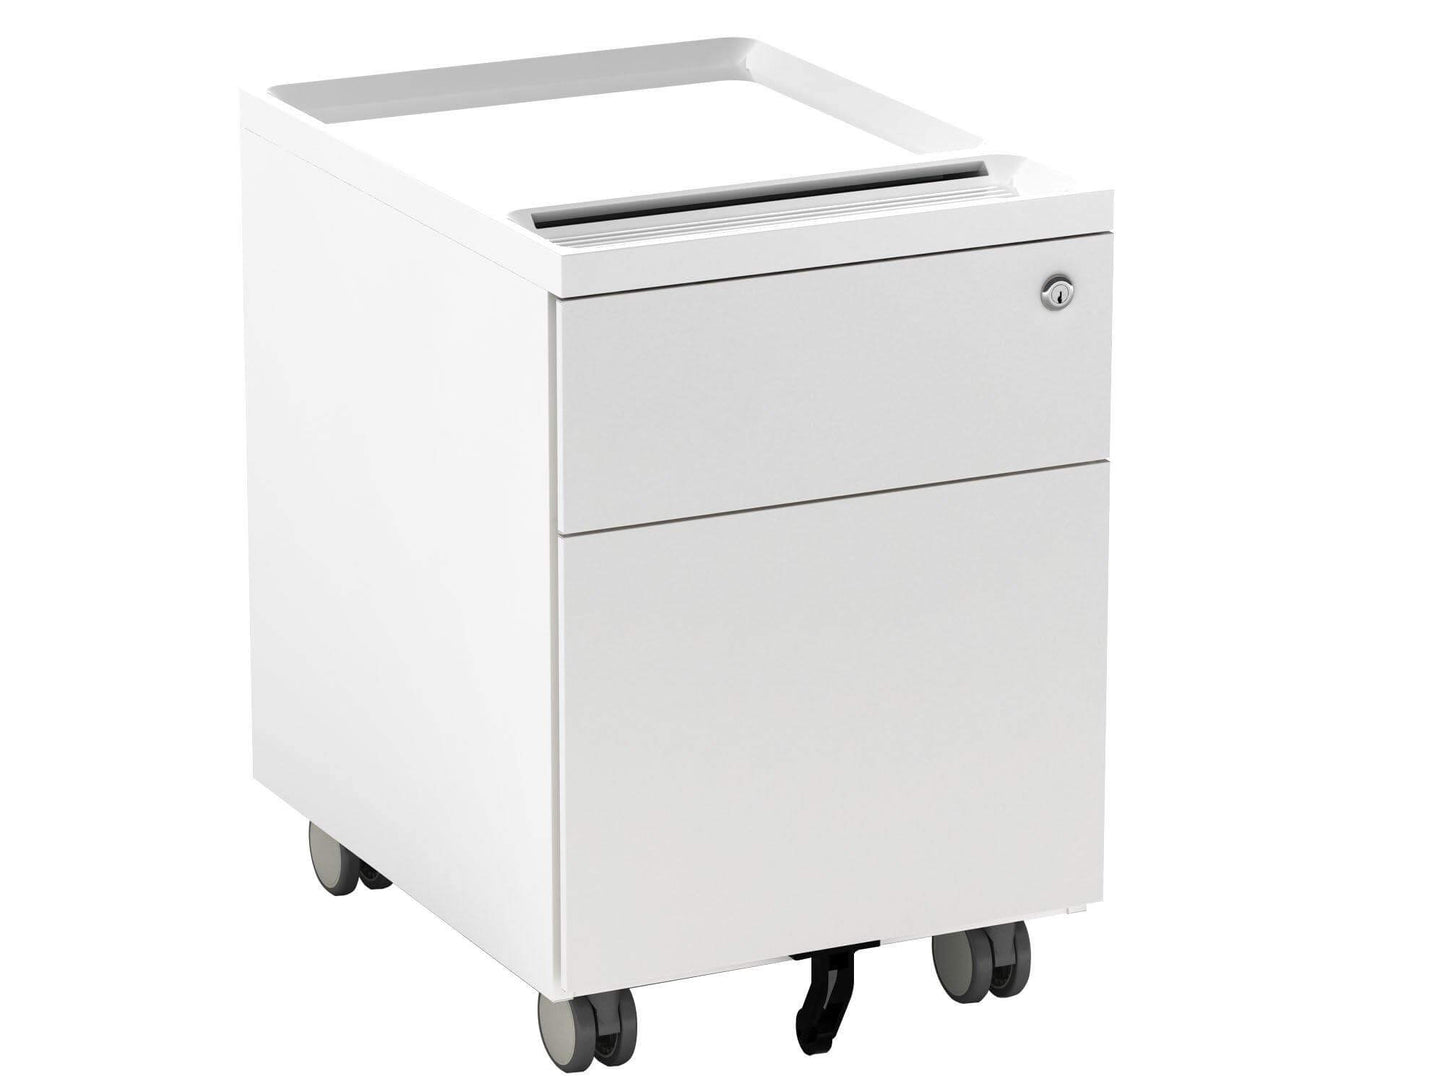 Filing Cabinet for Home Office | Mobile Vertical File Cabinet with Lock - ALFA PED Pedestal Black&White